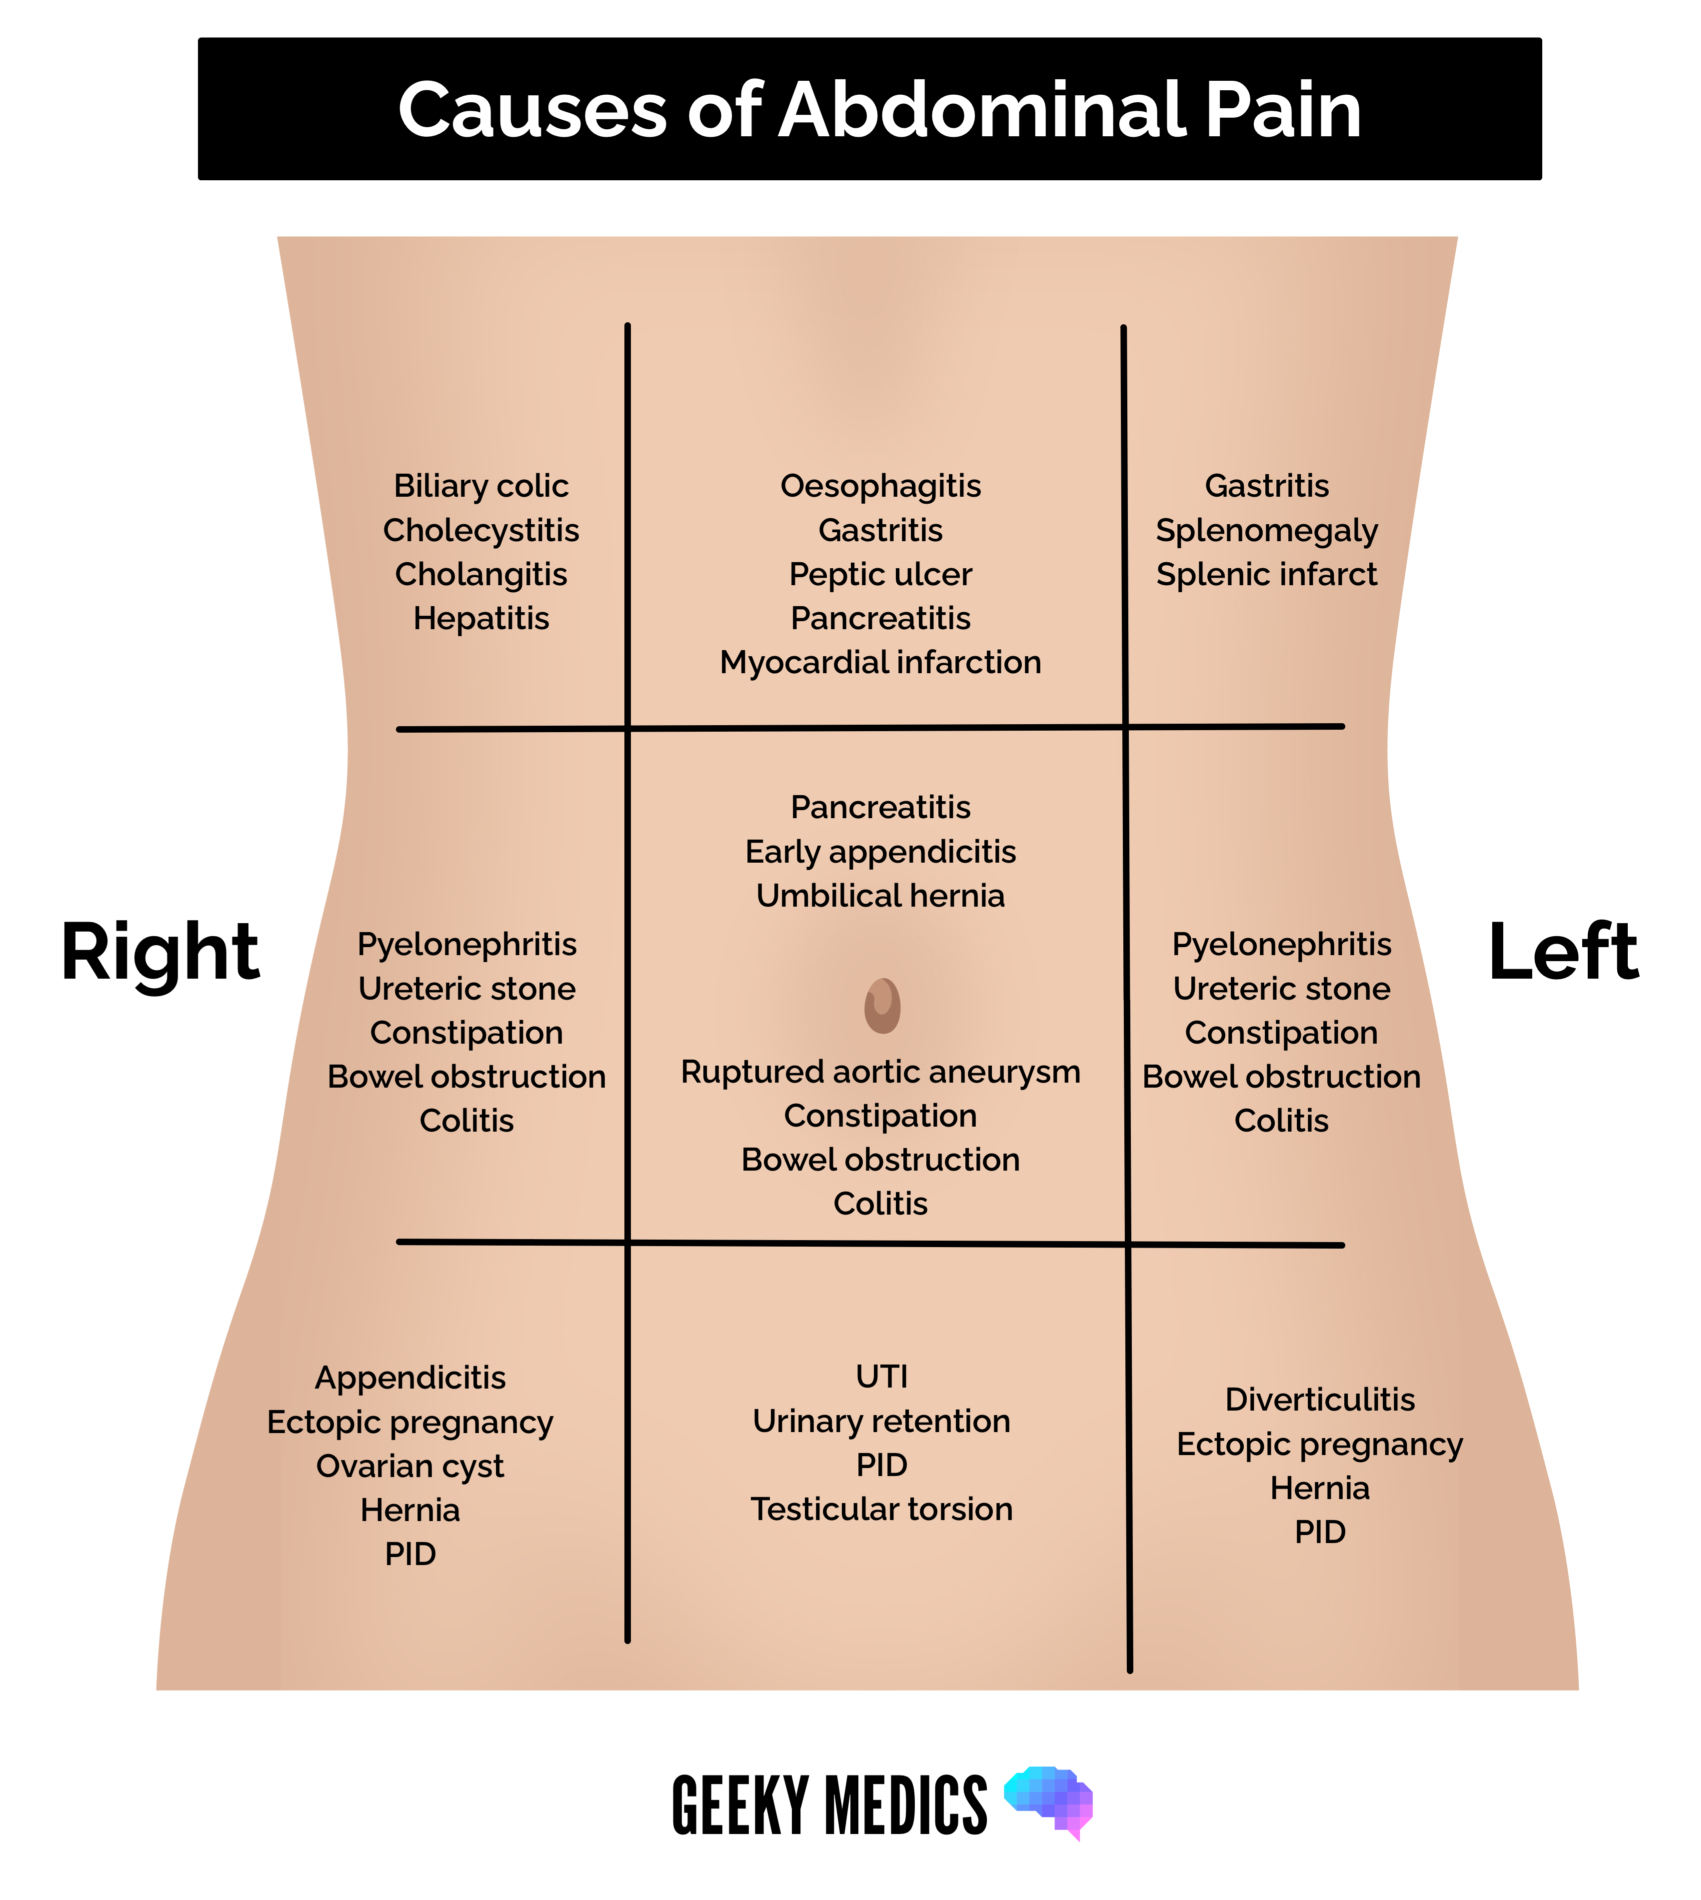 Causes of abdominal pain by location